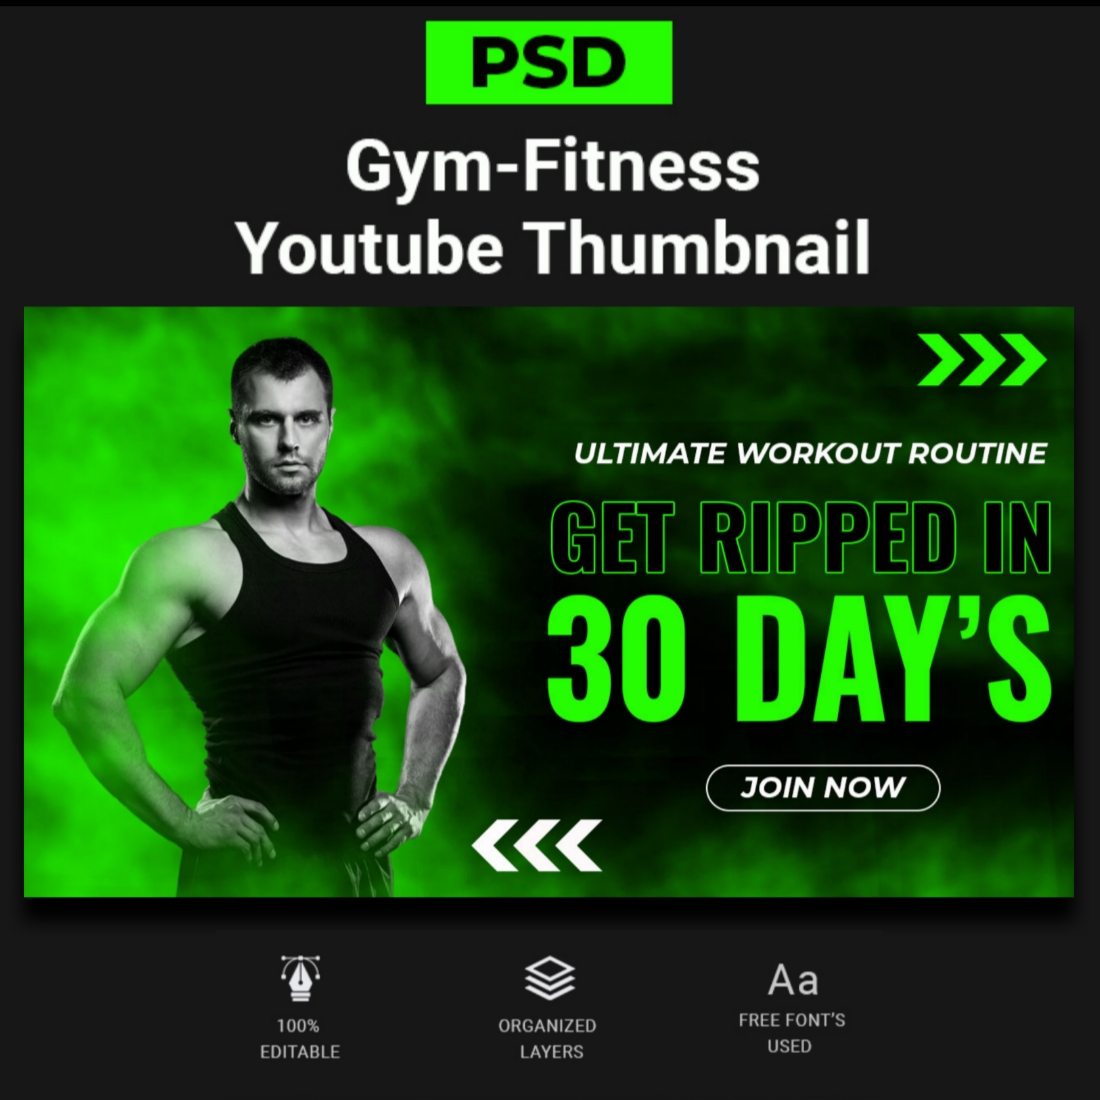 Gym-Fitness YouTube Thumbnail cover image.